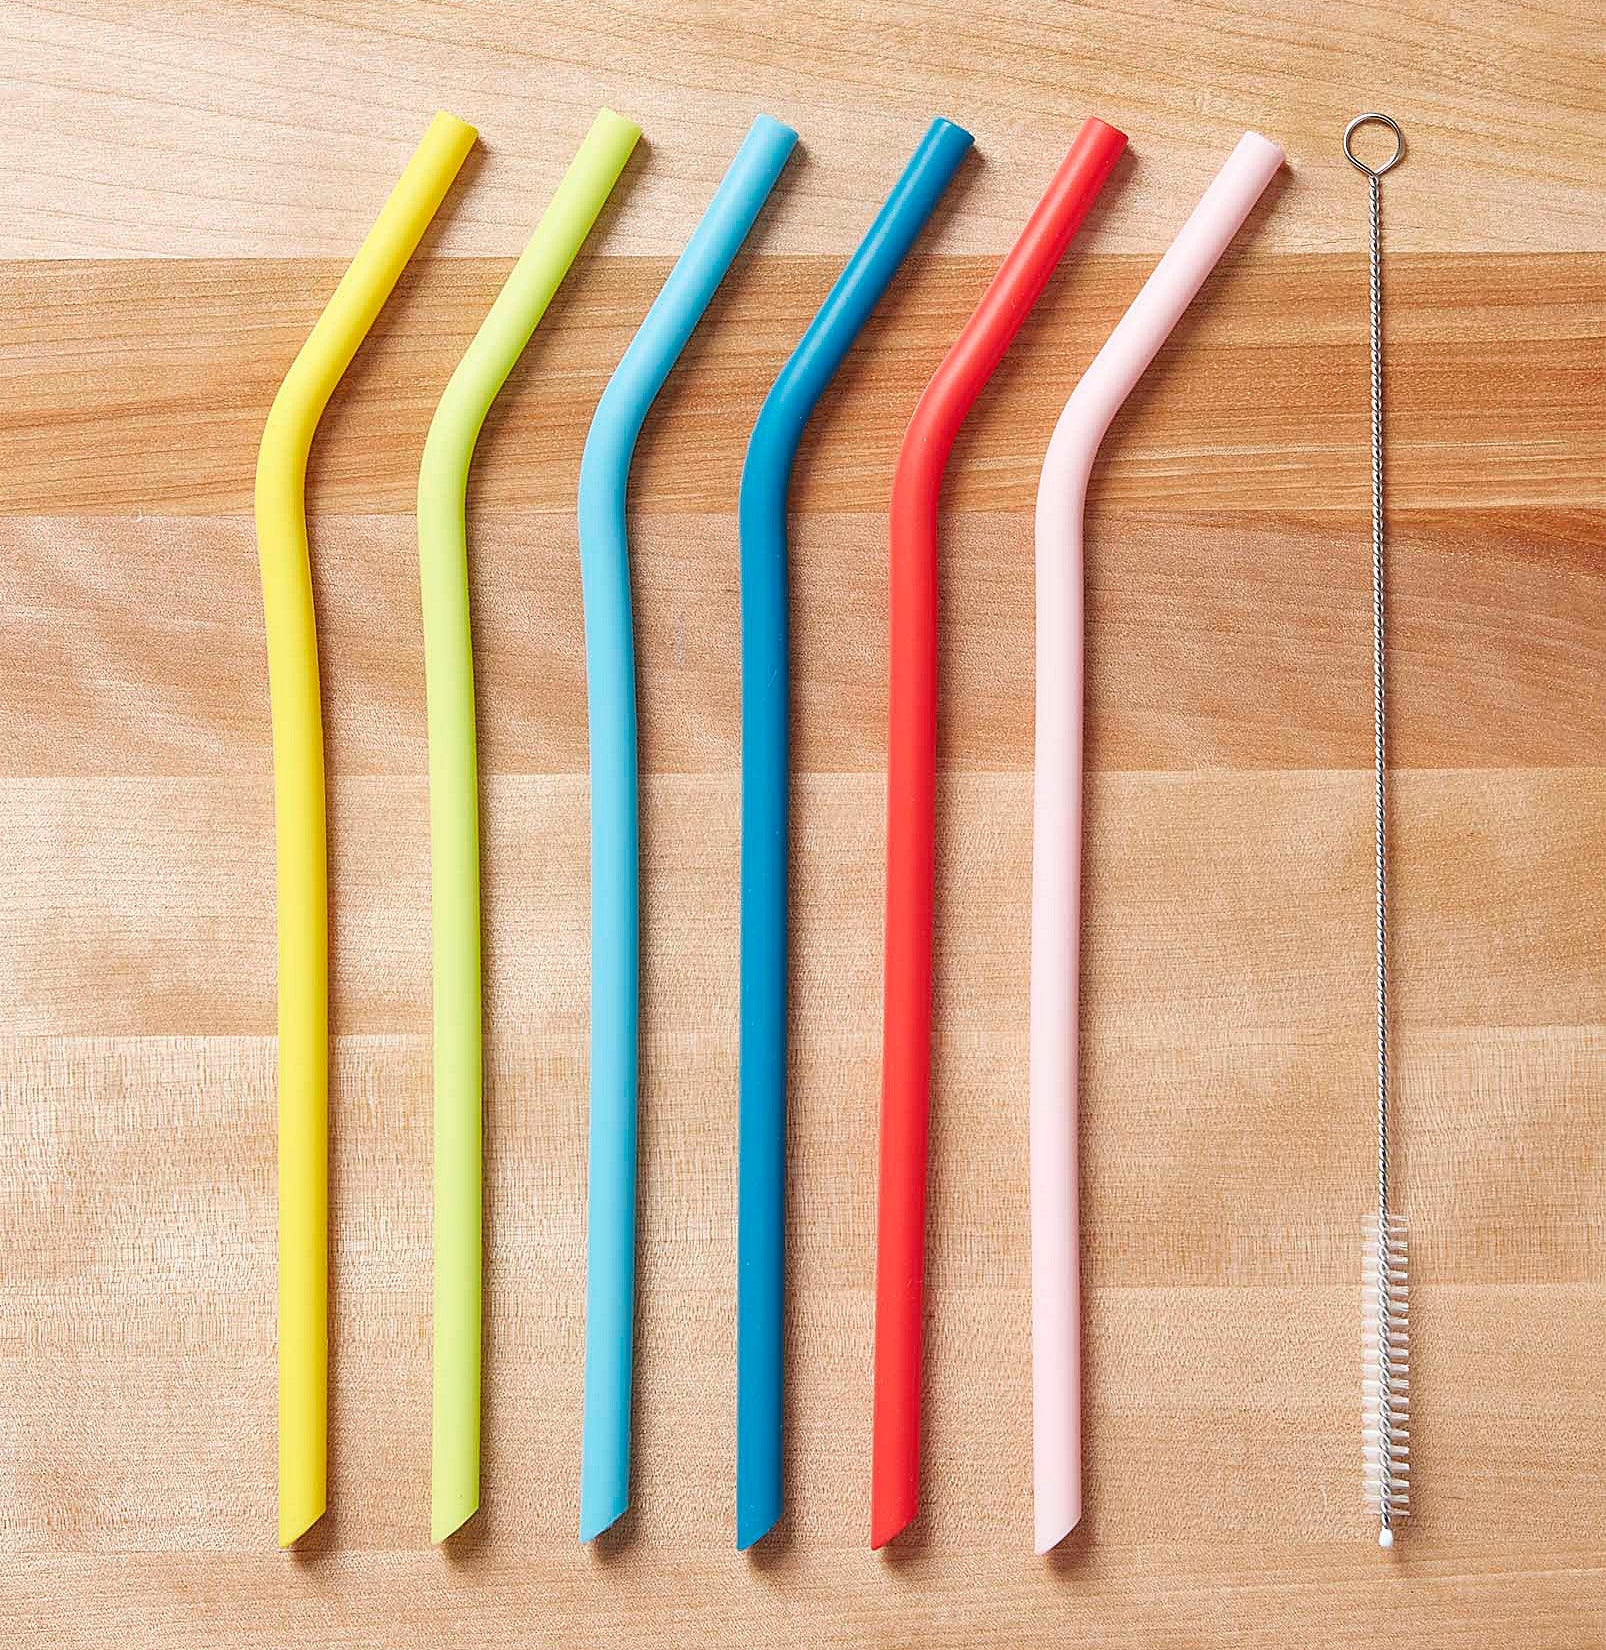 The six straws and their cleaning brush on a table